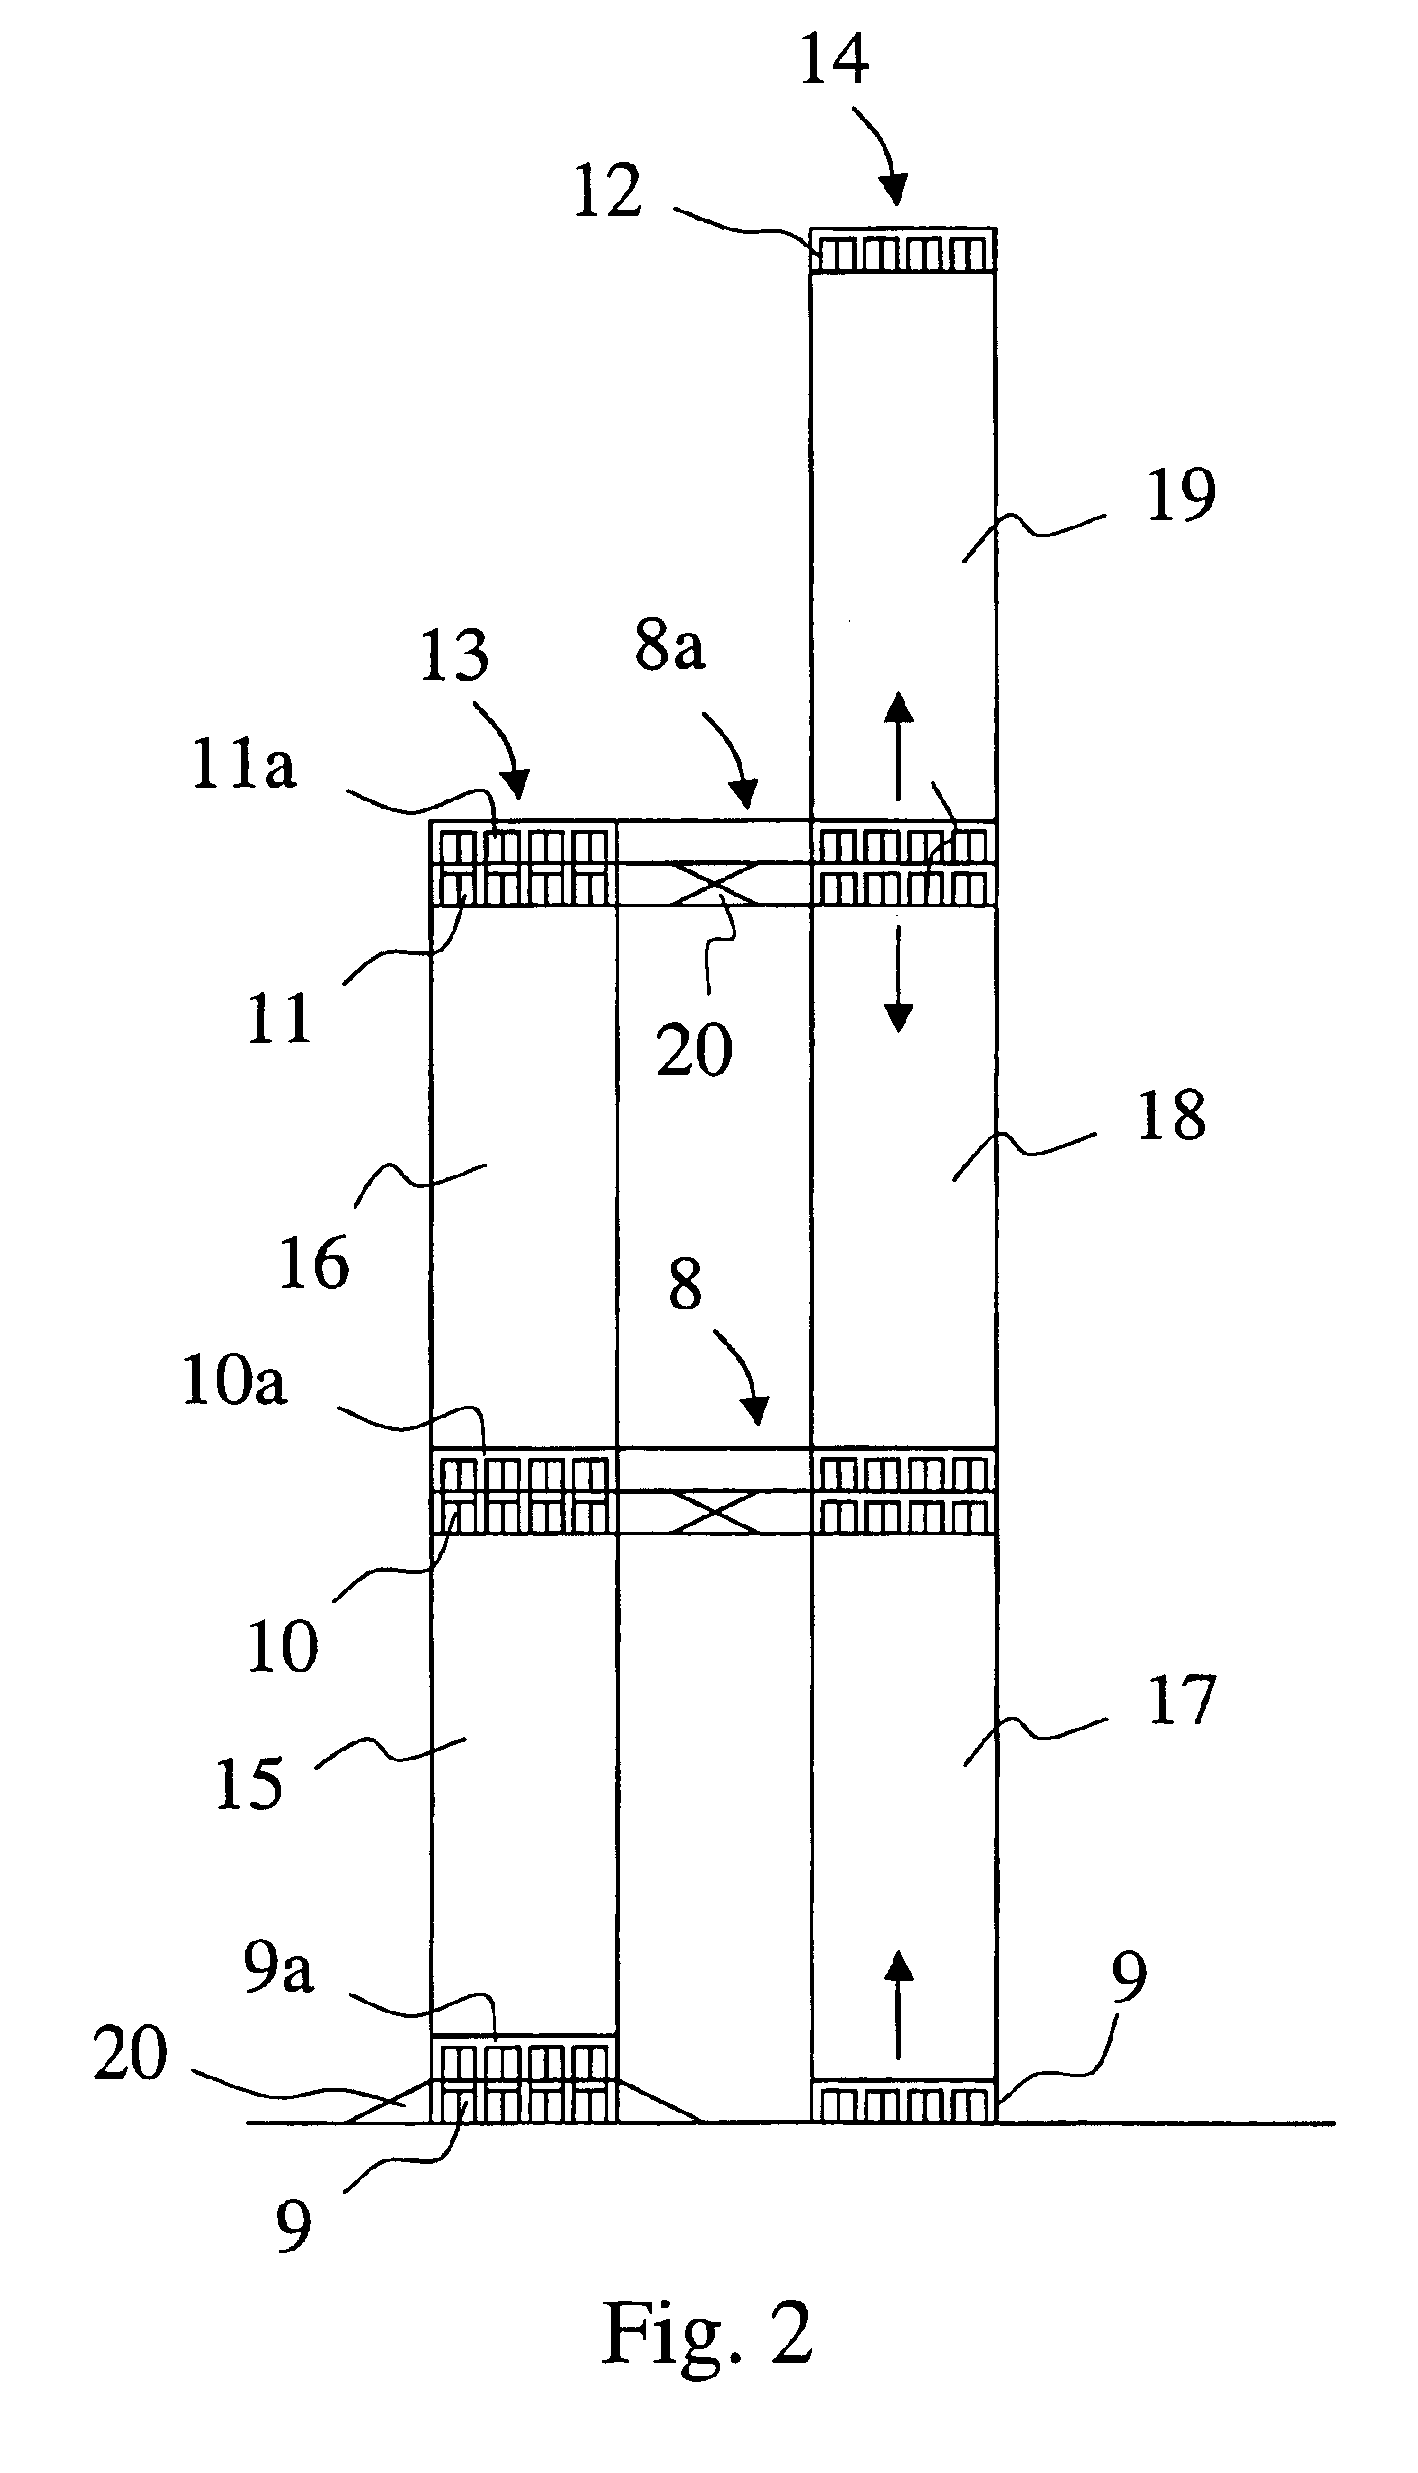 Elevator system with one or more cars moving independently in a same shaft